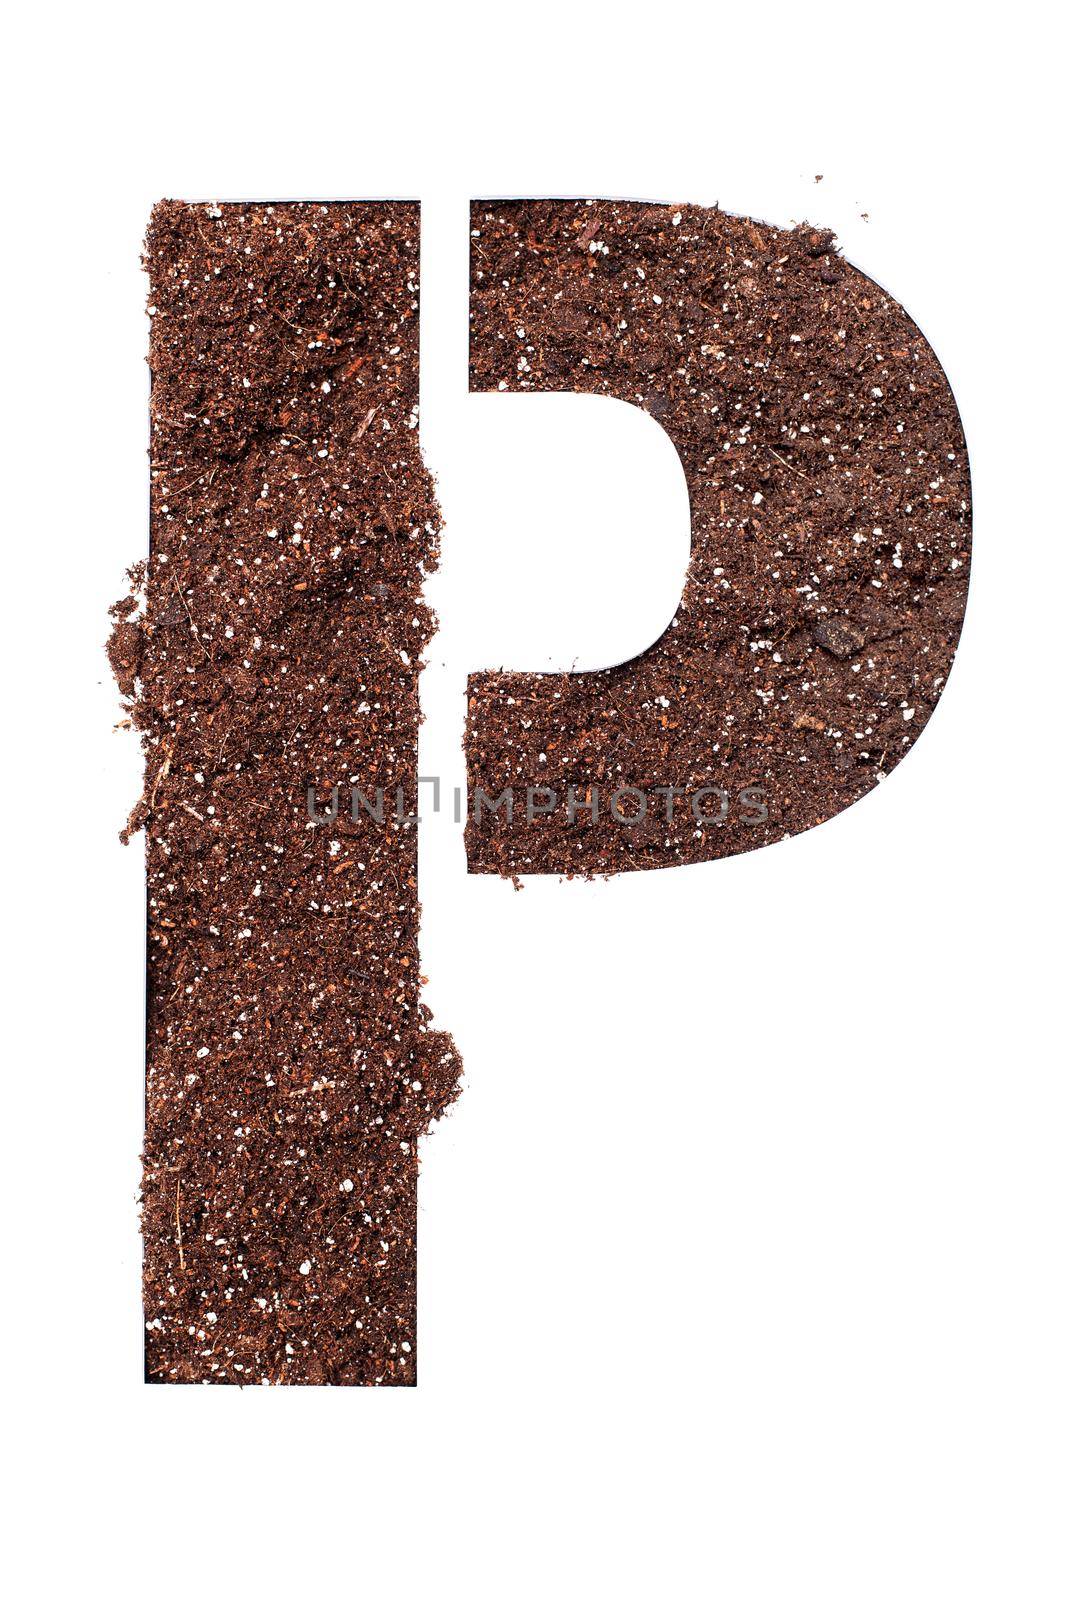 stencil letter P made above dirt on white surface by kokimk